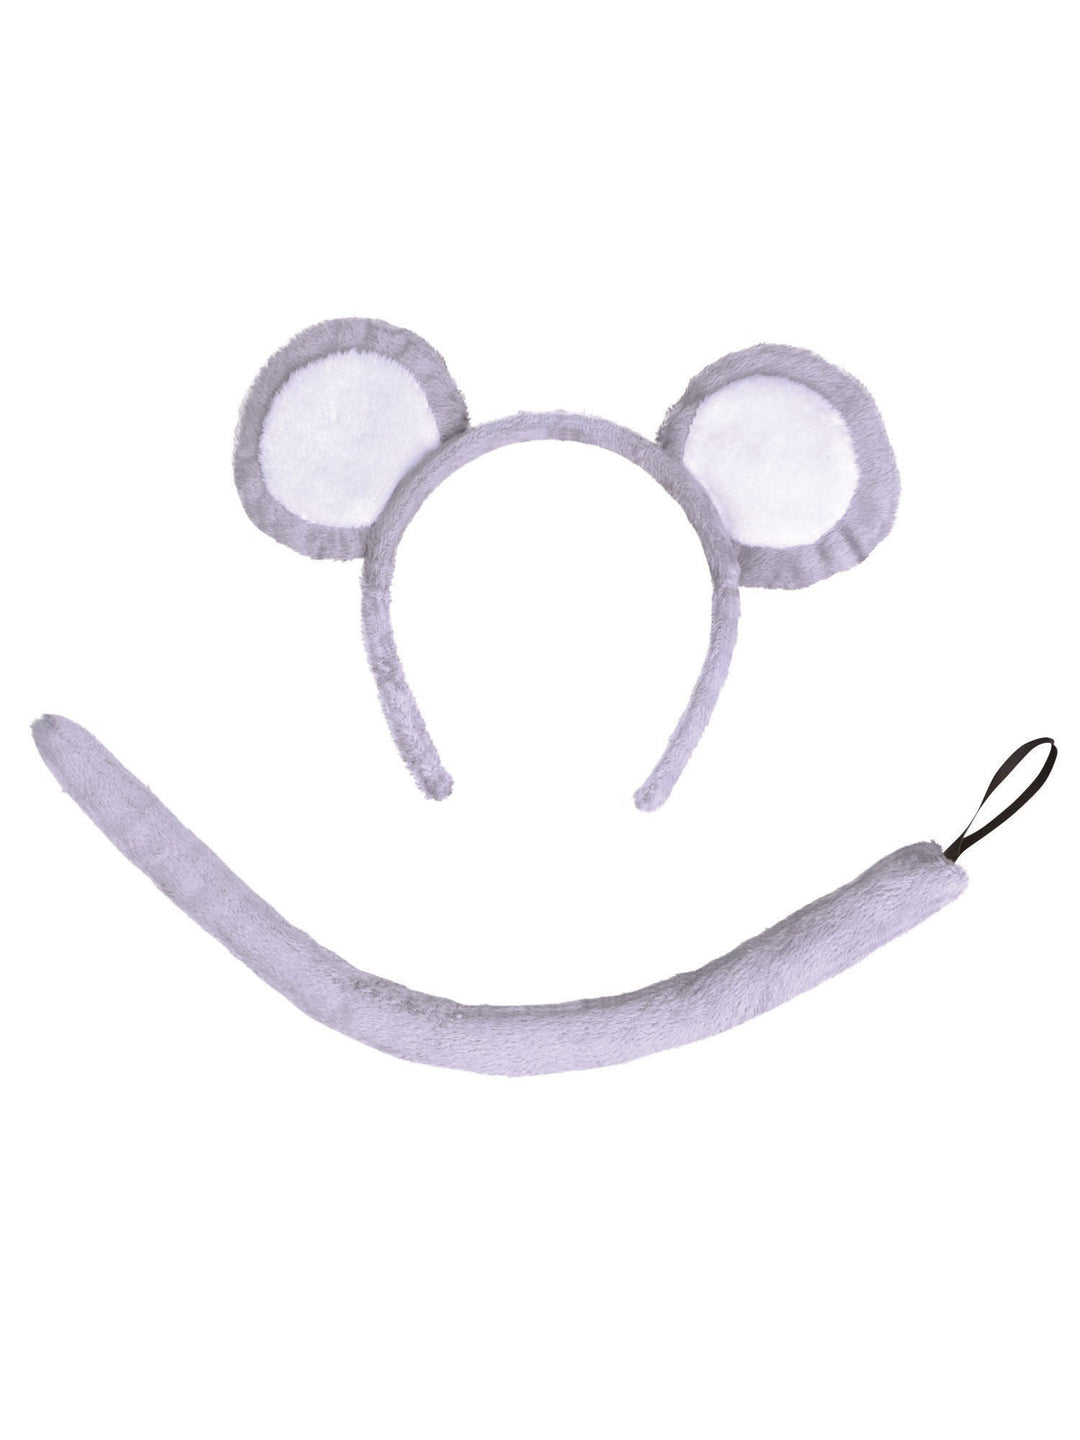 Mouse Set Grey Ears with Tail Kids Costume Kit Instant Disguise